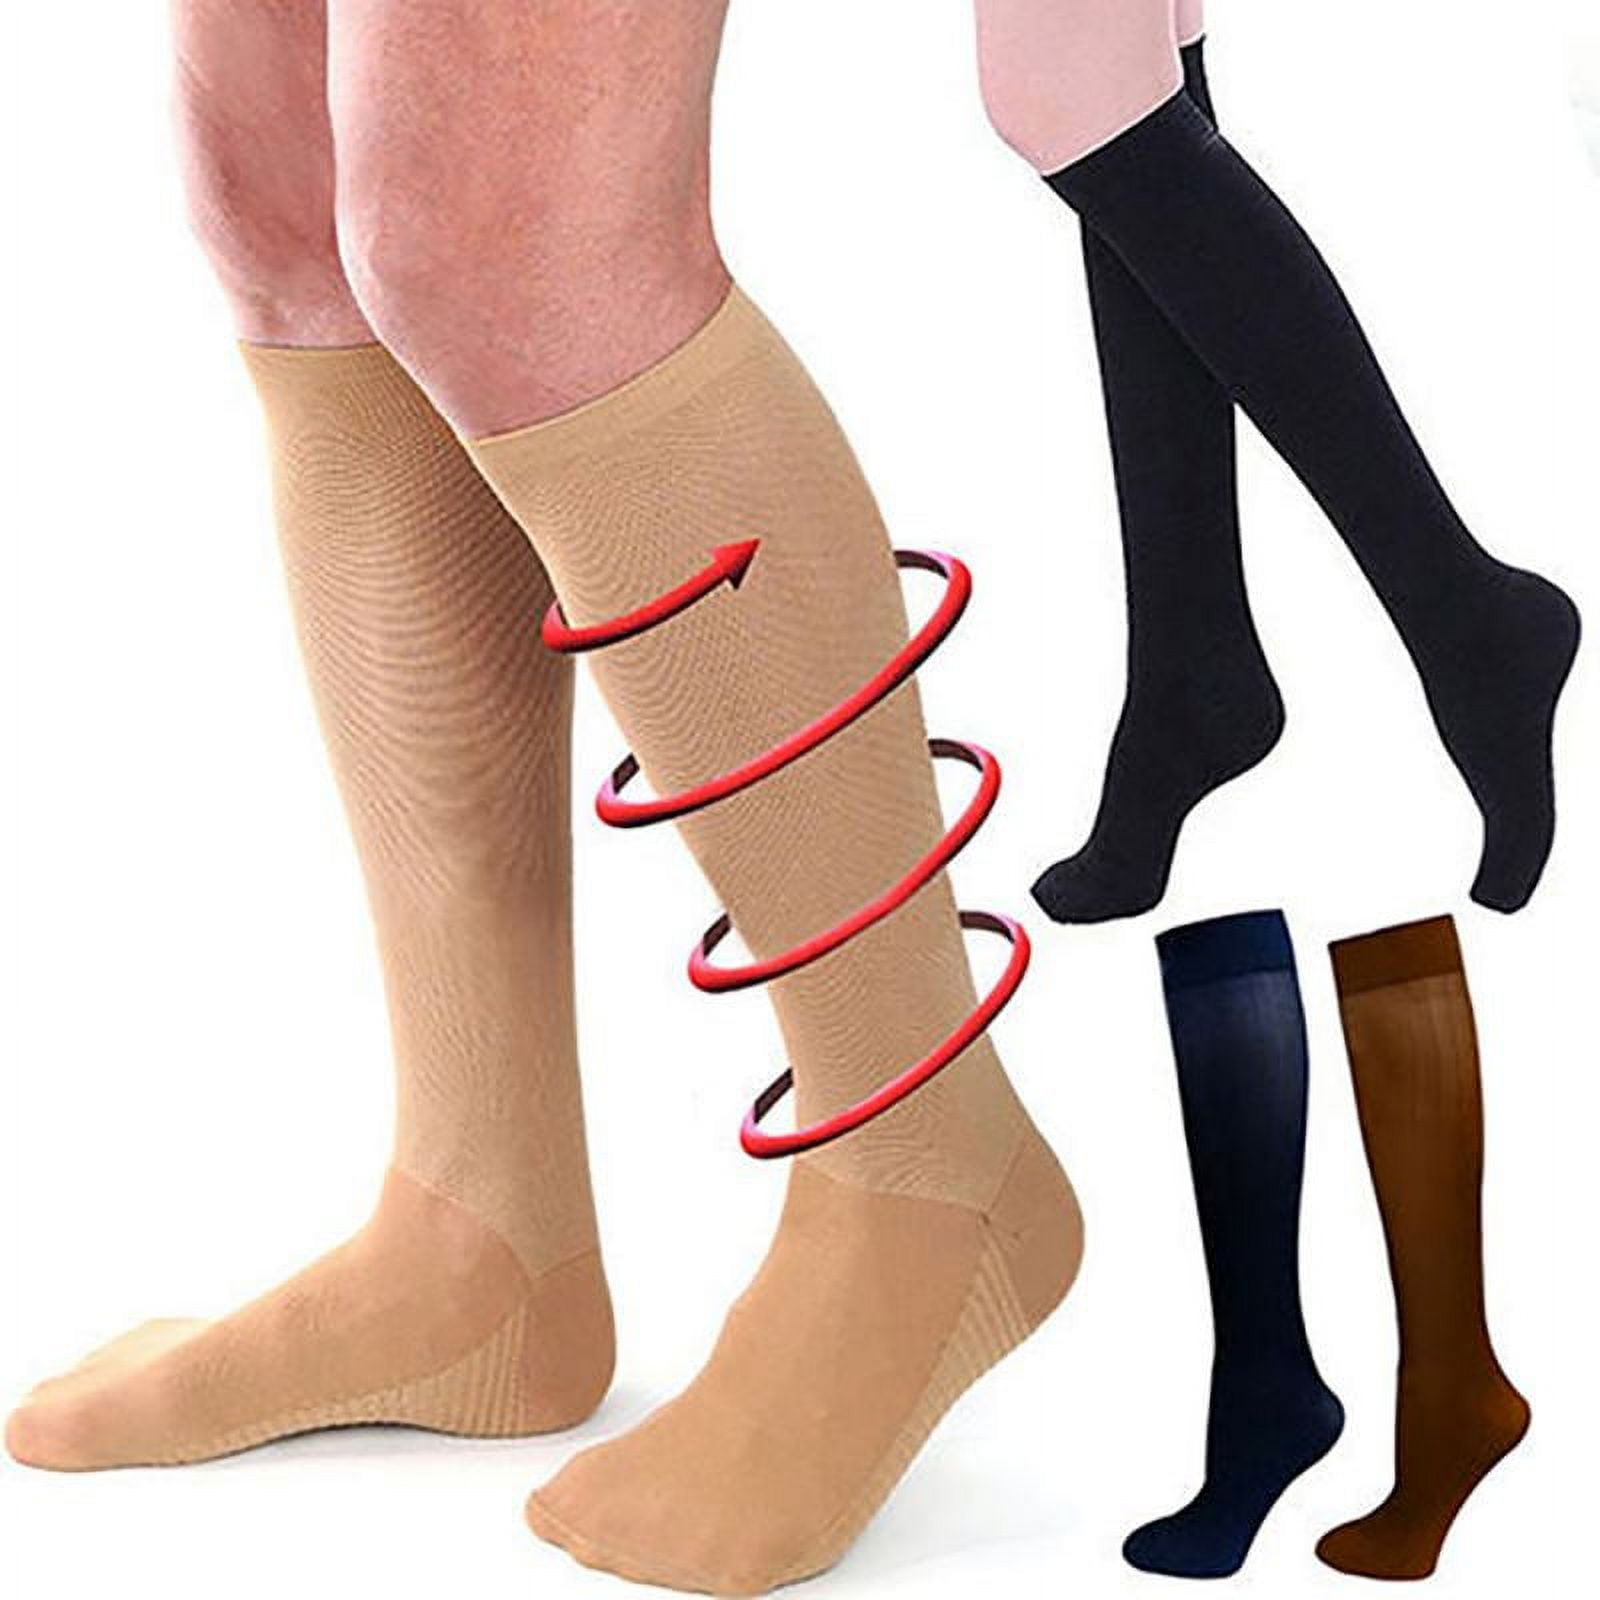 Compression Socks for Women and Men, Compression Outdoors Stockings,  Pressure Nylon Varicose Vein Stocking, Best Medical, Running, Nursing,  Hiking, Recovery & Flight Socks, 1 Pair, S - XL, Coffee 